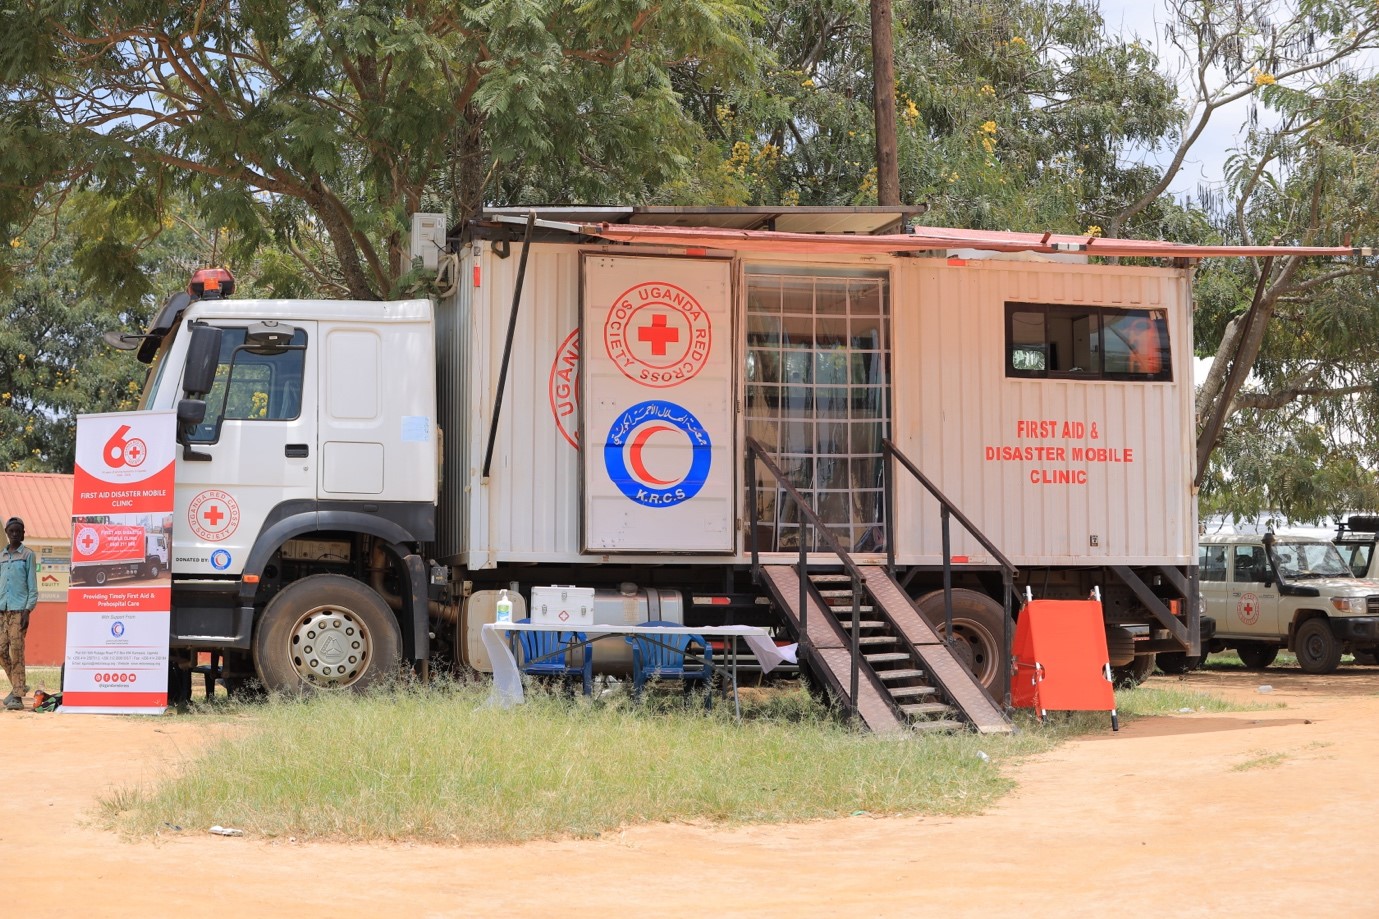 Uganda red cross society launches the first aid and disaster mobile clinic, bringing pre-hospital care closer during times of emergency